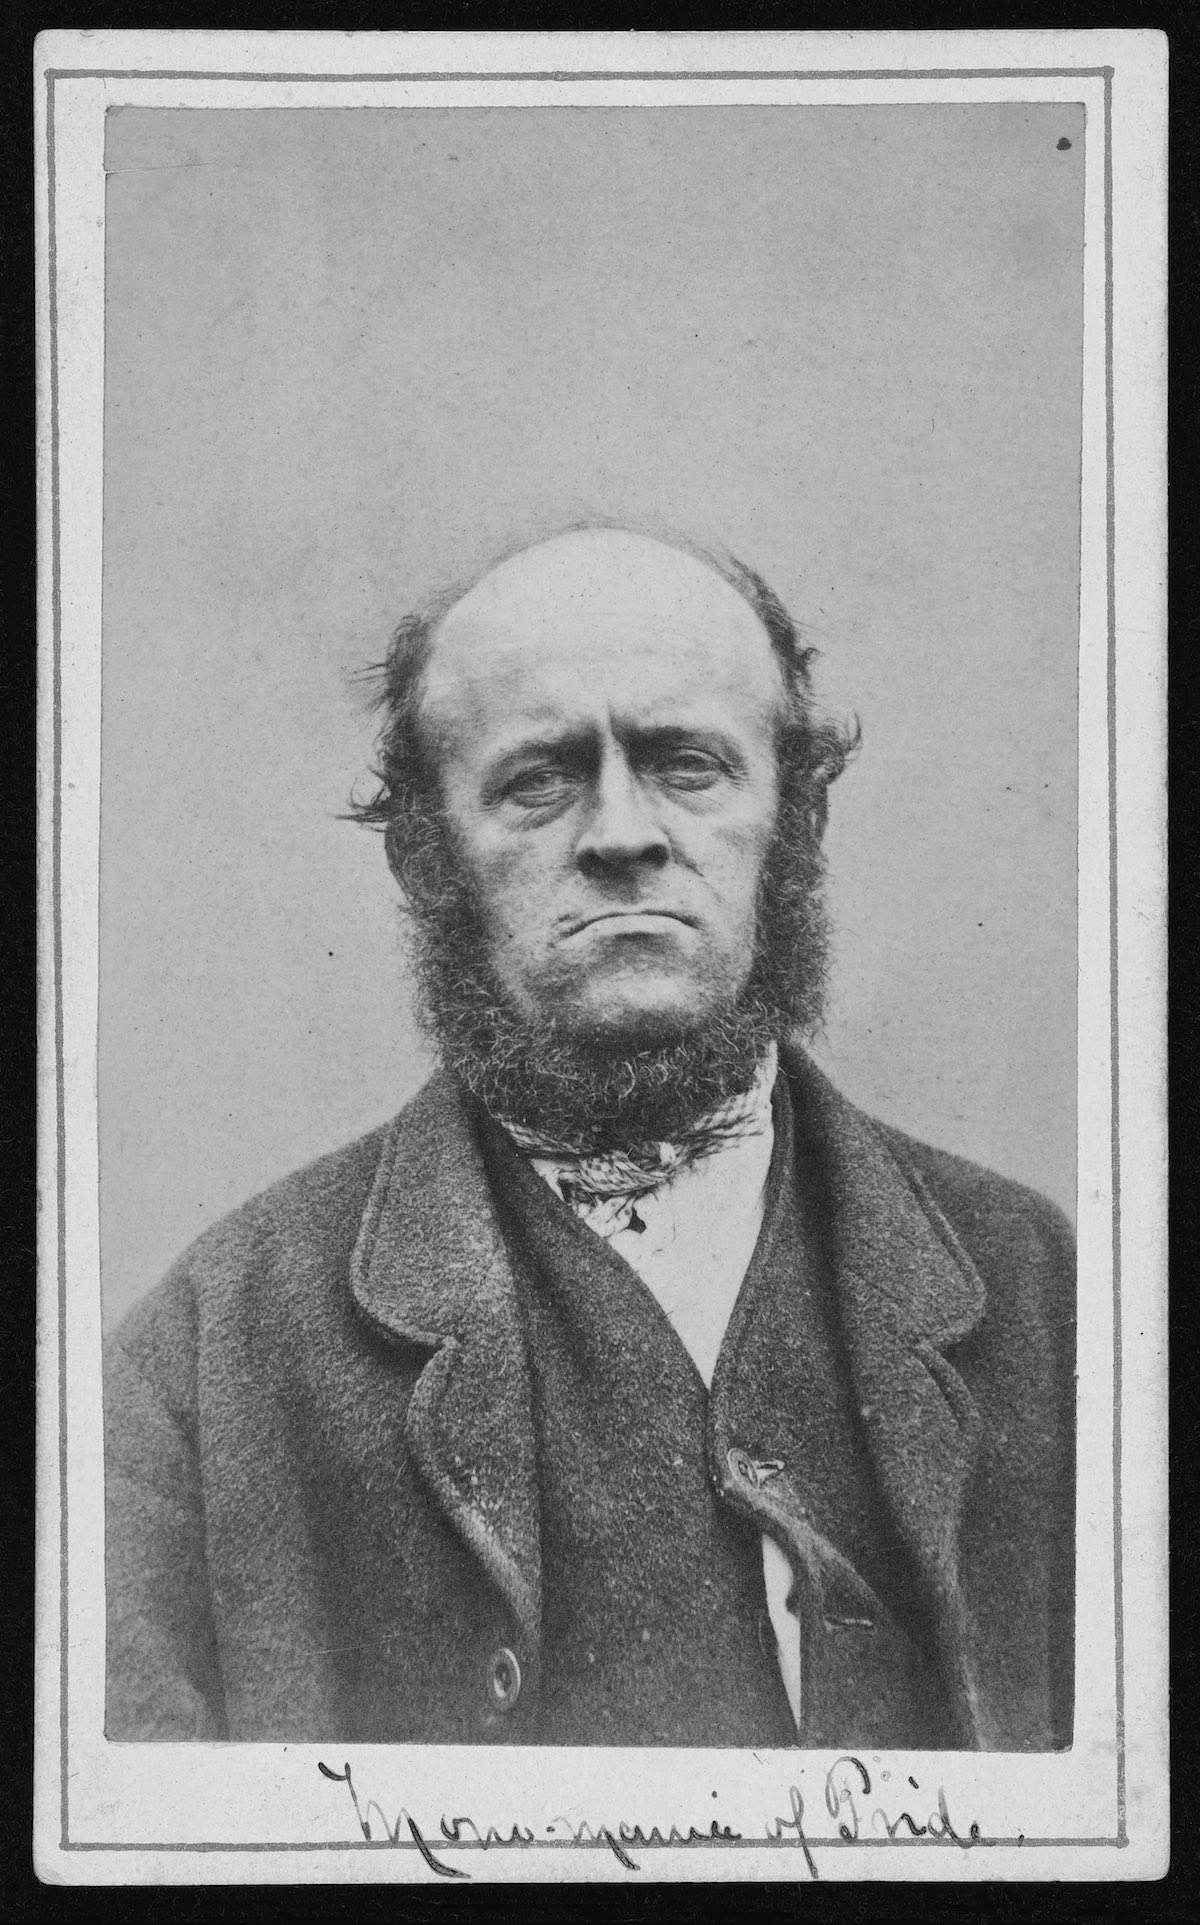 Portraits from a "lunatic asylum" Inmates at West Riding Asylum, in Yorkshire, England